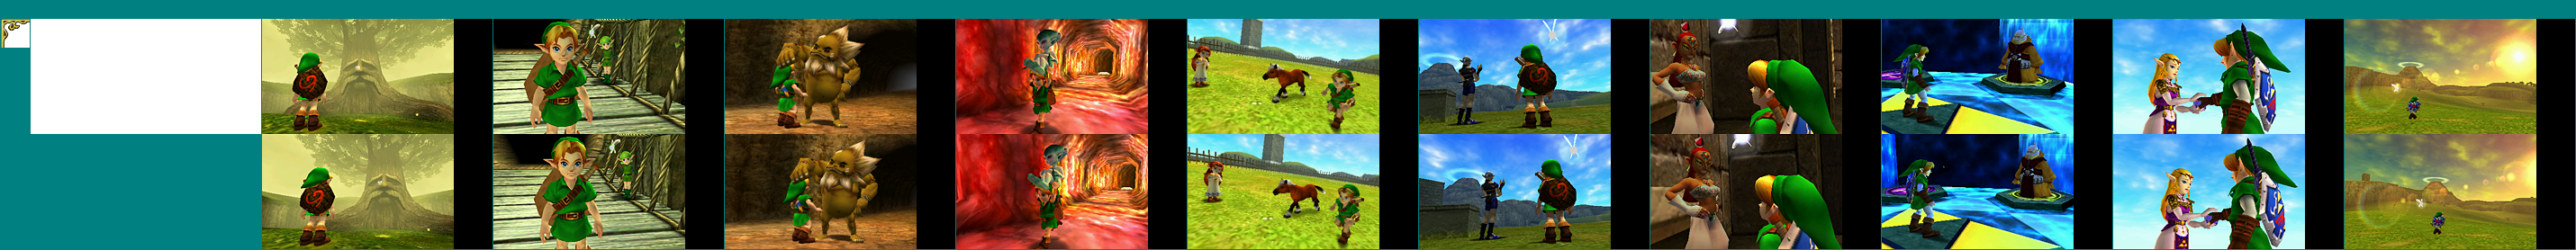 The Legend of Zelda: Ocarina of Time 3D - Credits Sequence